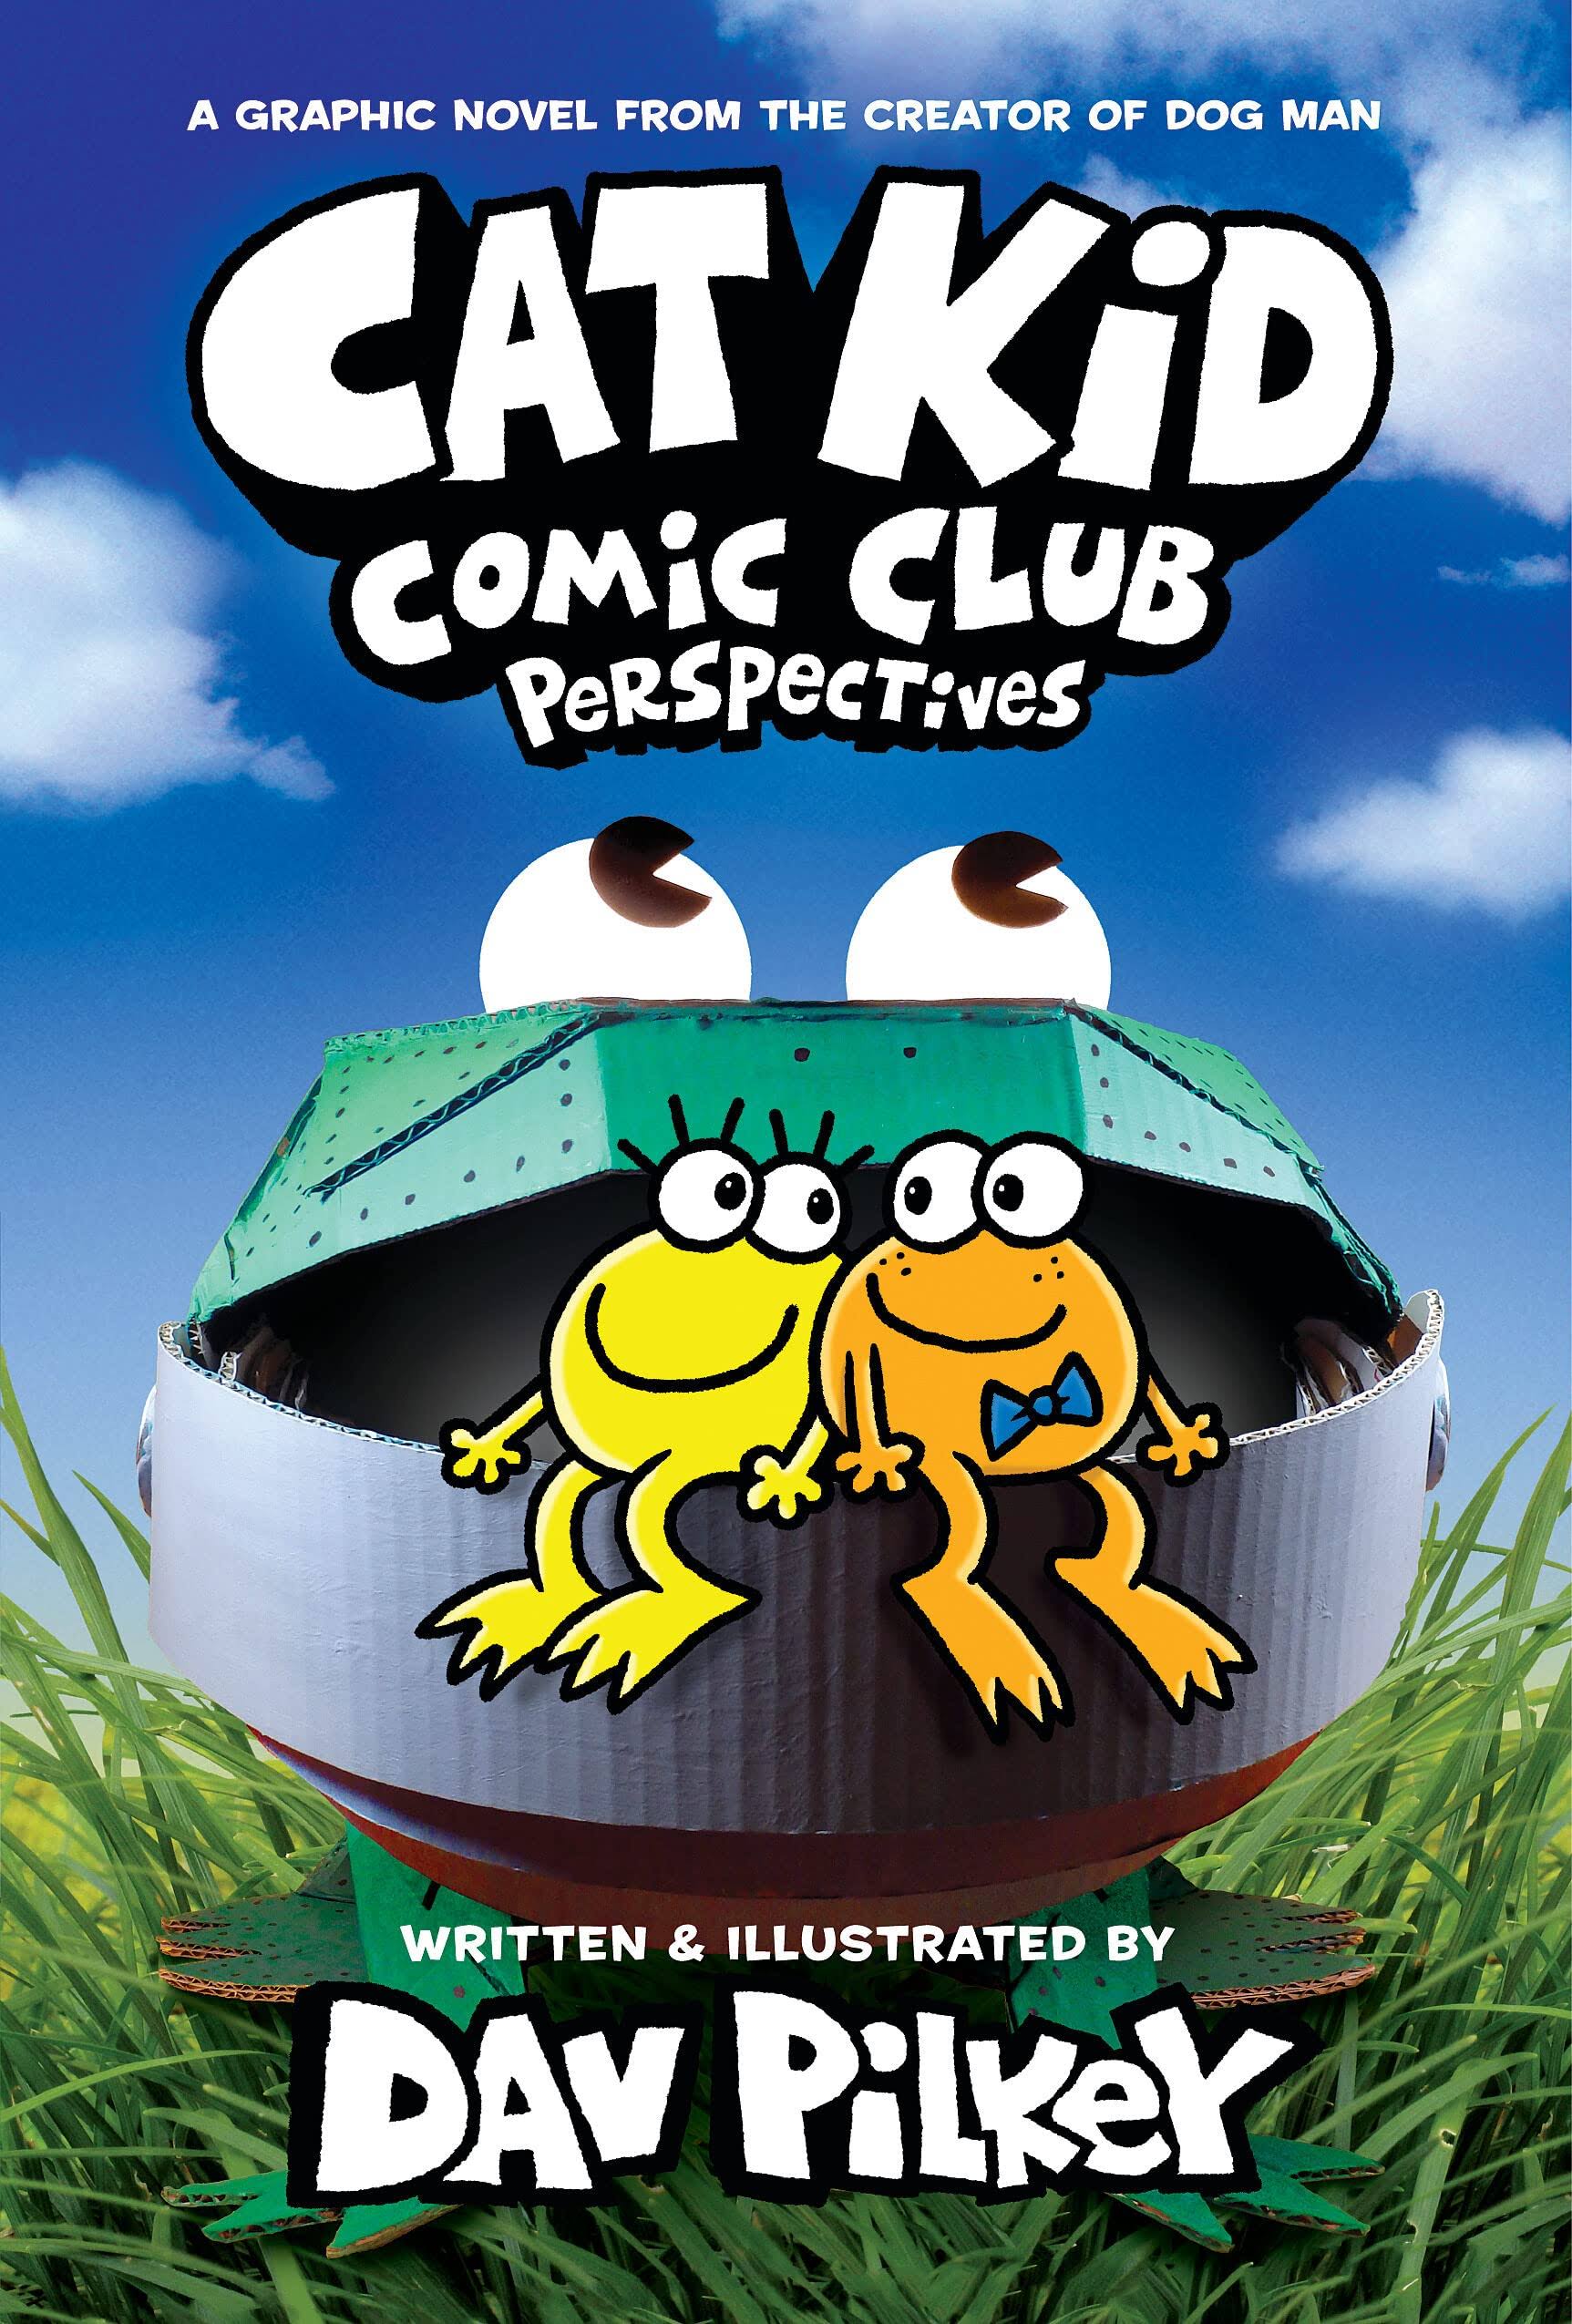 Cat Kid Comic Club Perspectives: A Graphic Novel (Cat Kid Comic Club #2) from the Creator of Dog Man [Book]